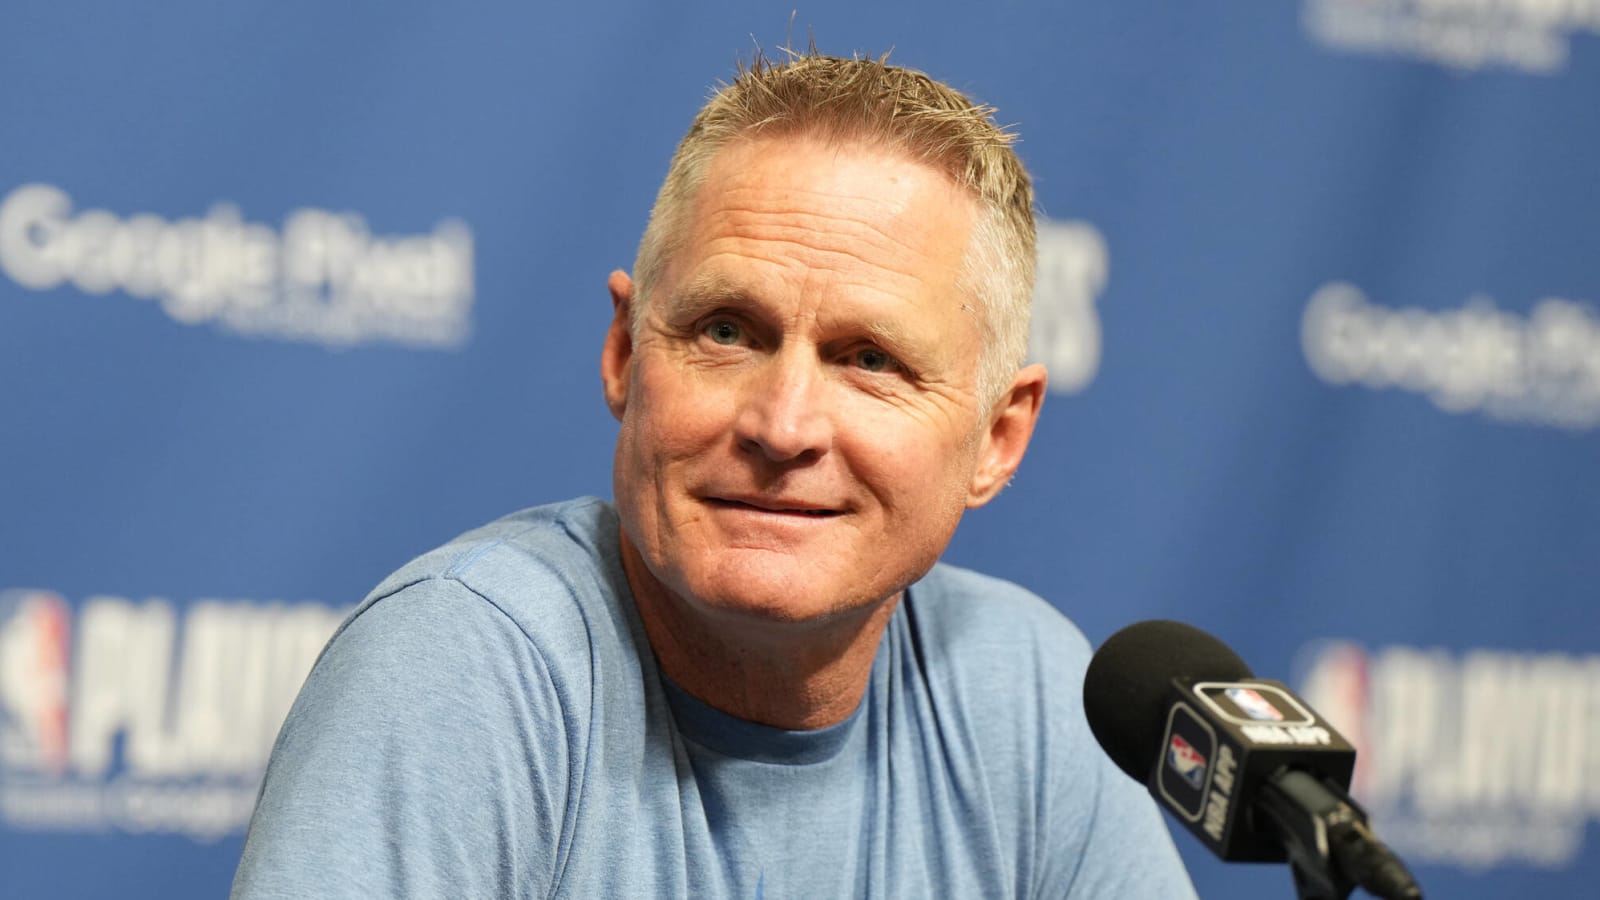 Steve Kerr points out which star is ‘the guy’ on Team USA